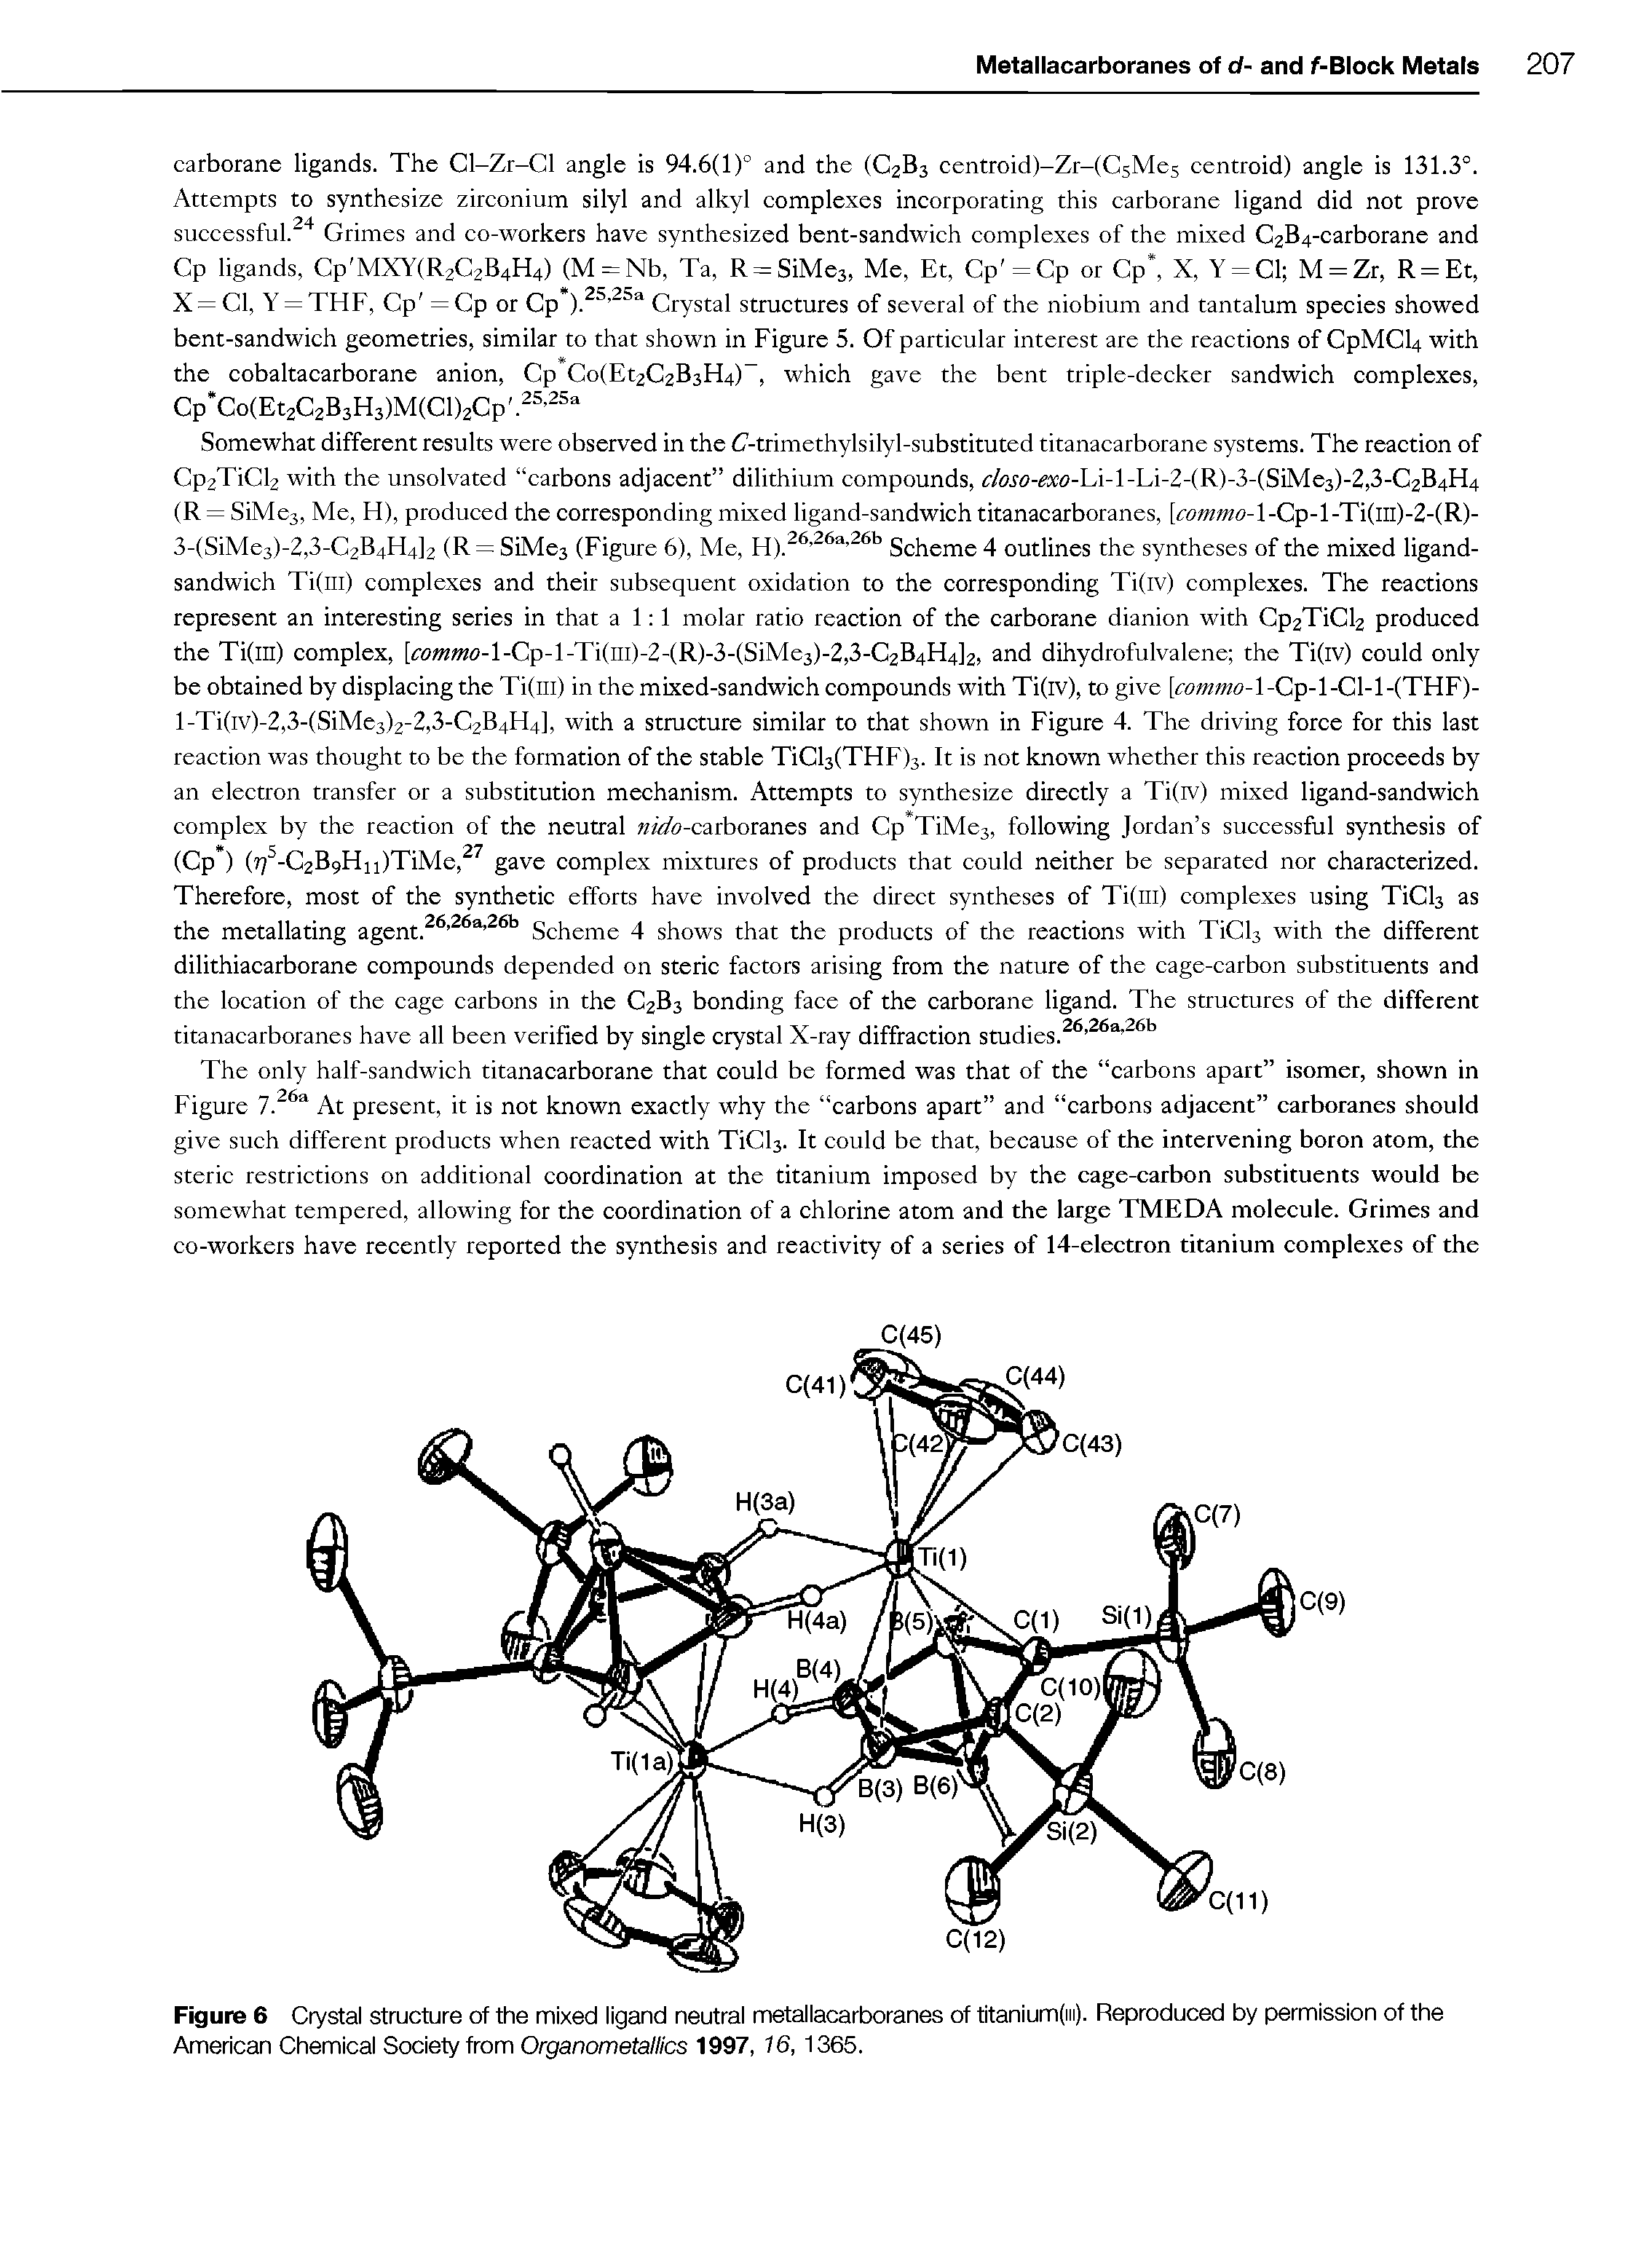 Figure 6 Crystal structure of the mixed ligand neutral metallacarboranes of titanium(iii). Reproduced by permission of the American Chemical Society from Organometallics 1997, 16, 1365.